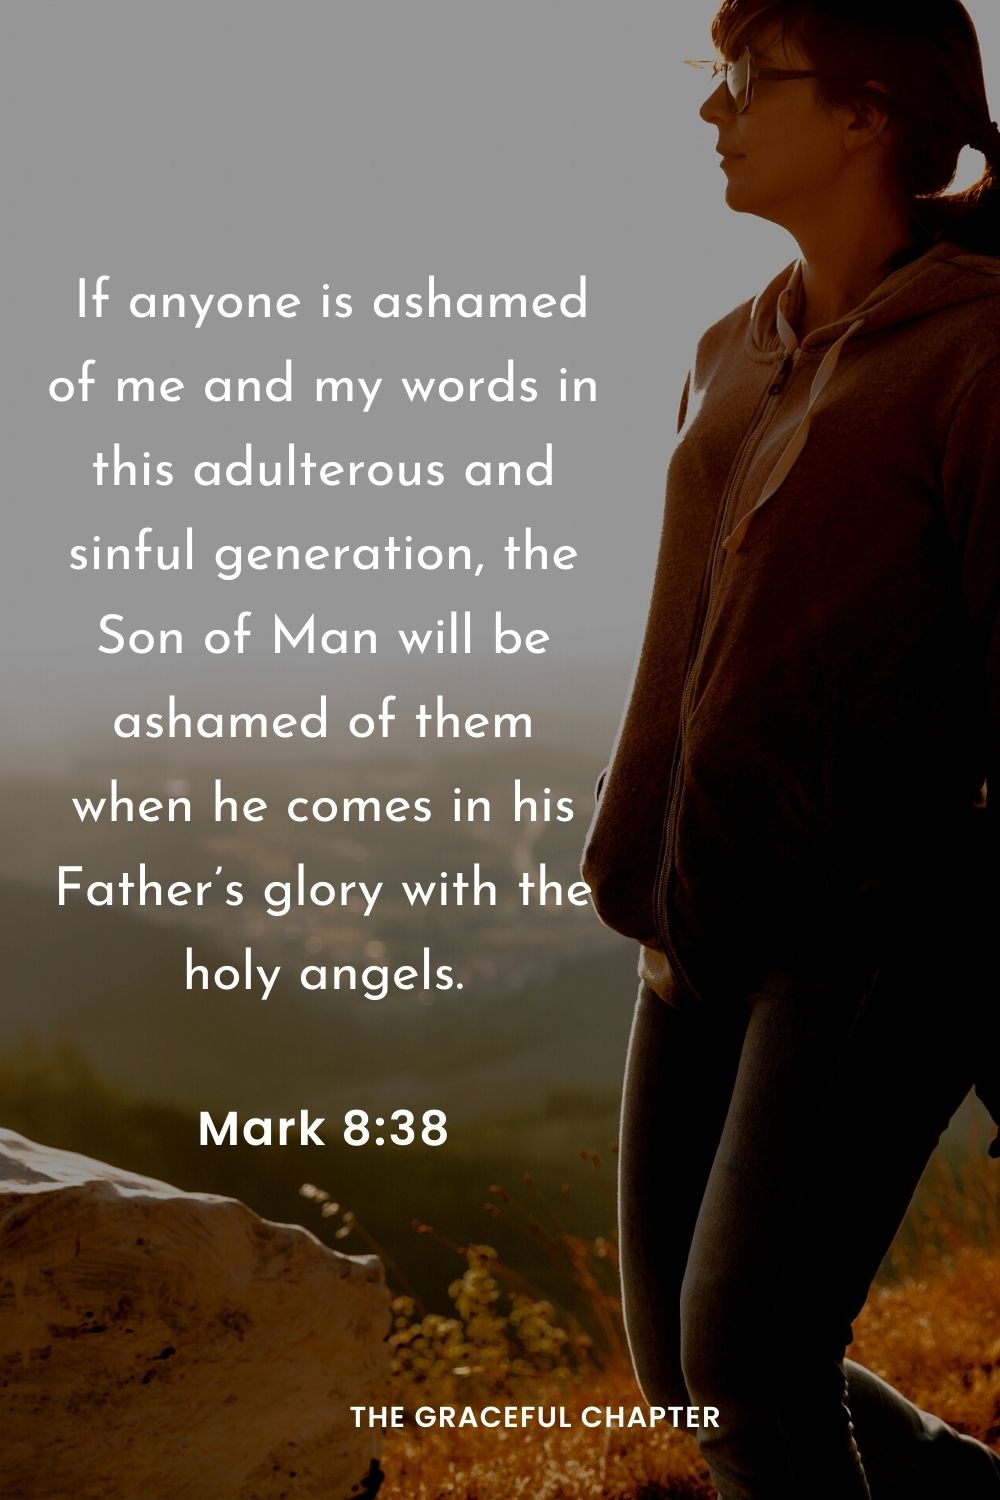  If anyone is ashamed of me and my words in this adulterous and sinful generation, the Son of Man will be ashamed of them when he comes in his Father’s glory with the holy angels.